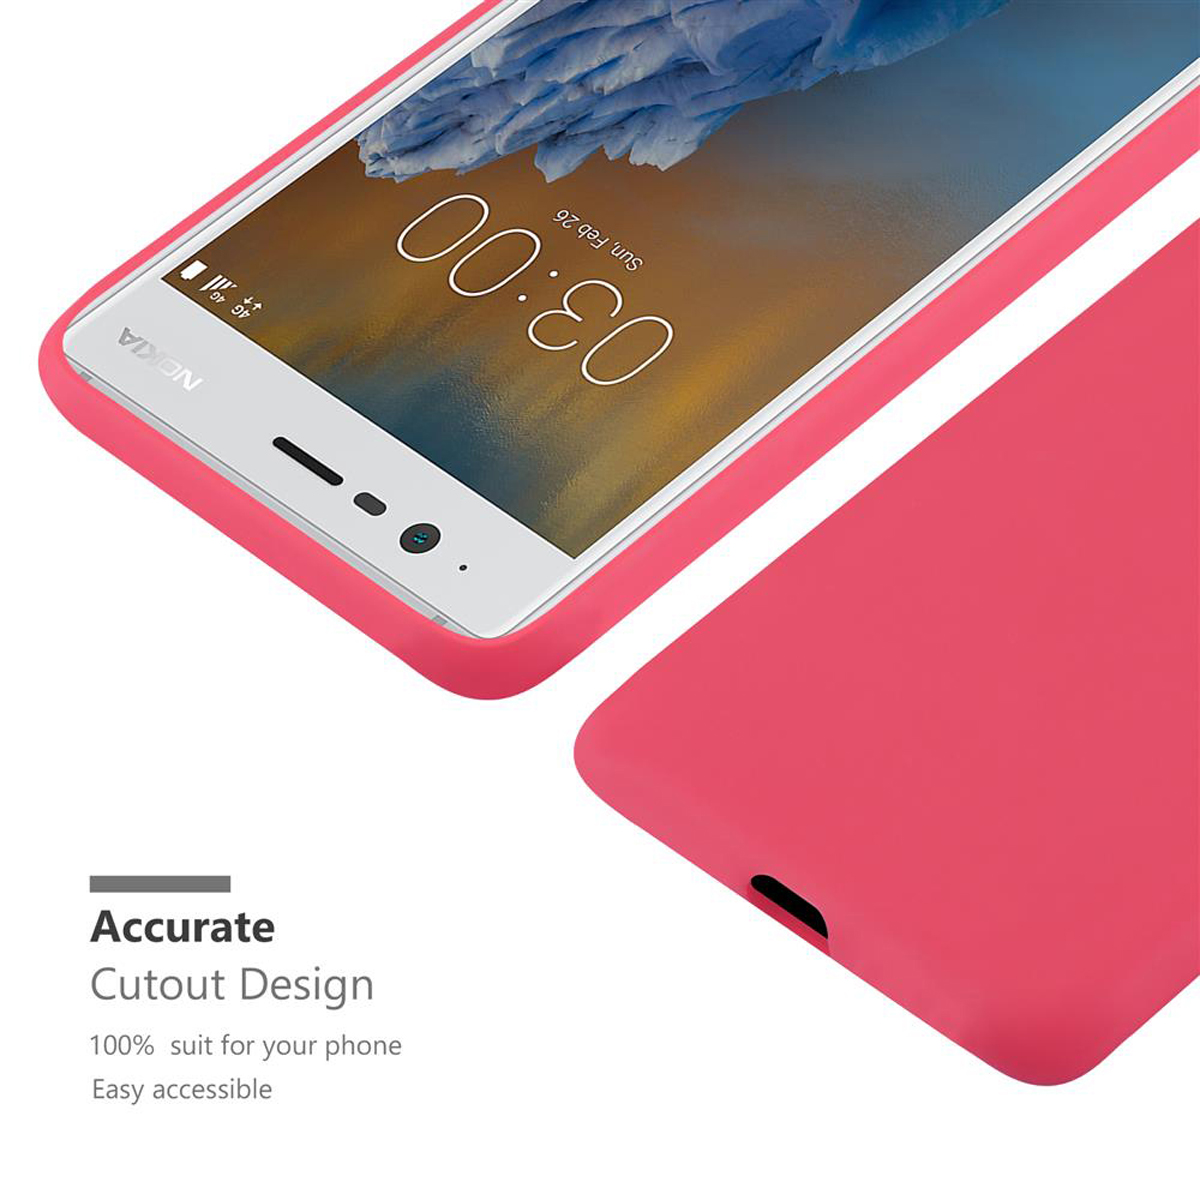 Nokia, 2017, Backcover, CANDY 3 Hülle Candy CADORABO ROT TPU Style, im